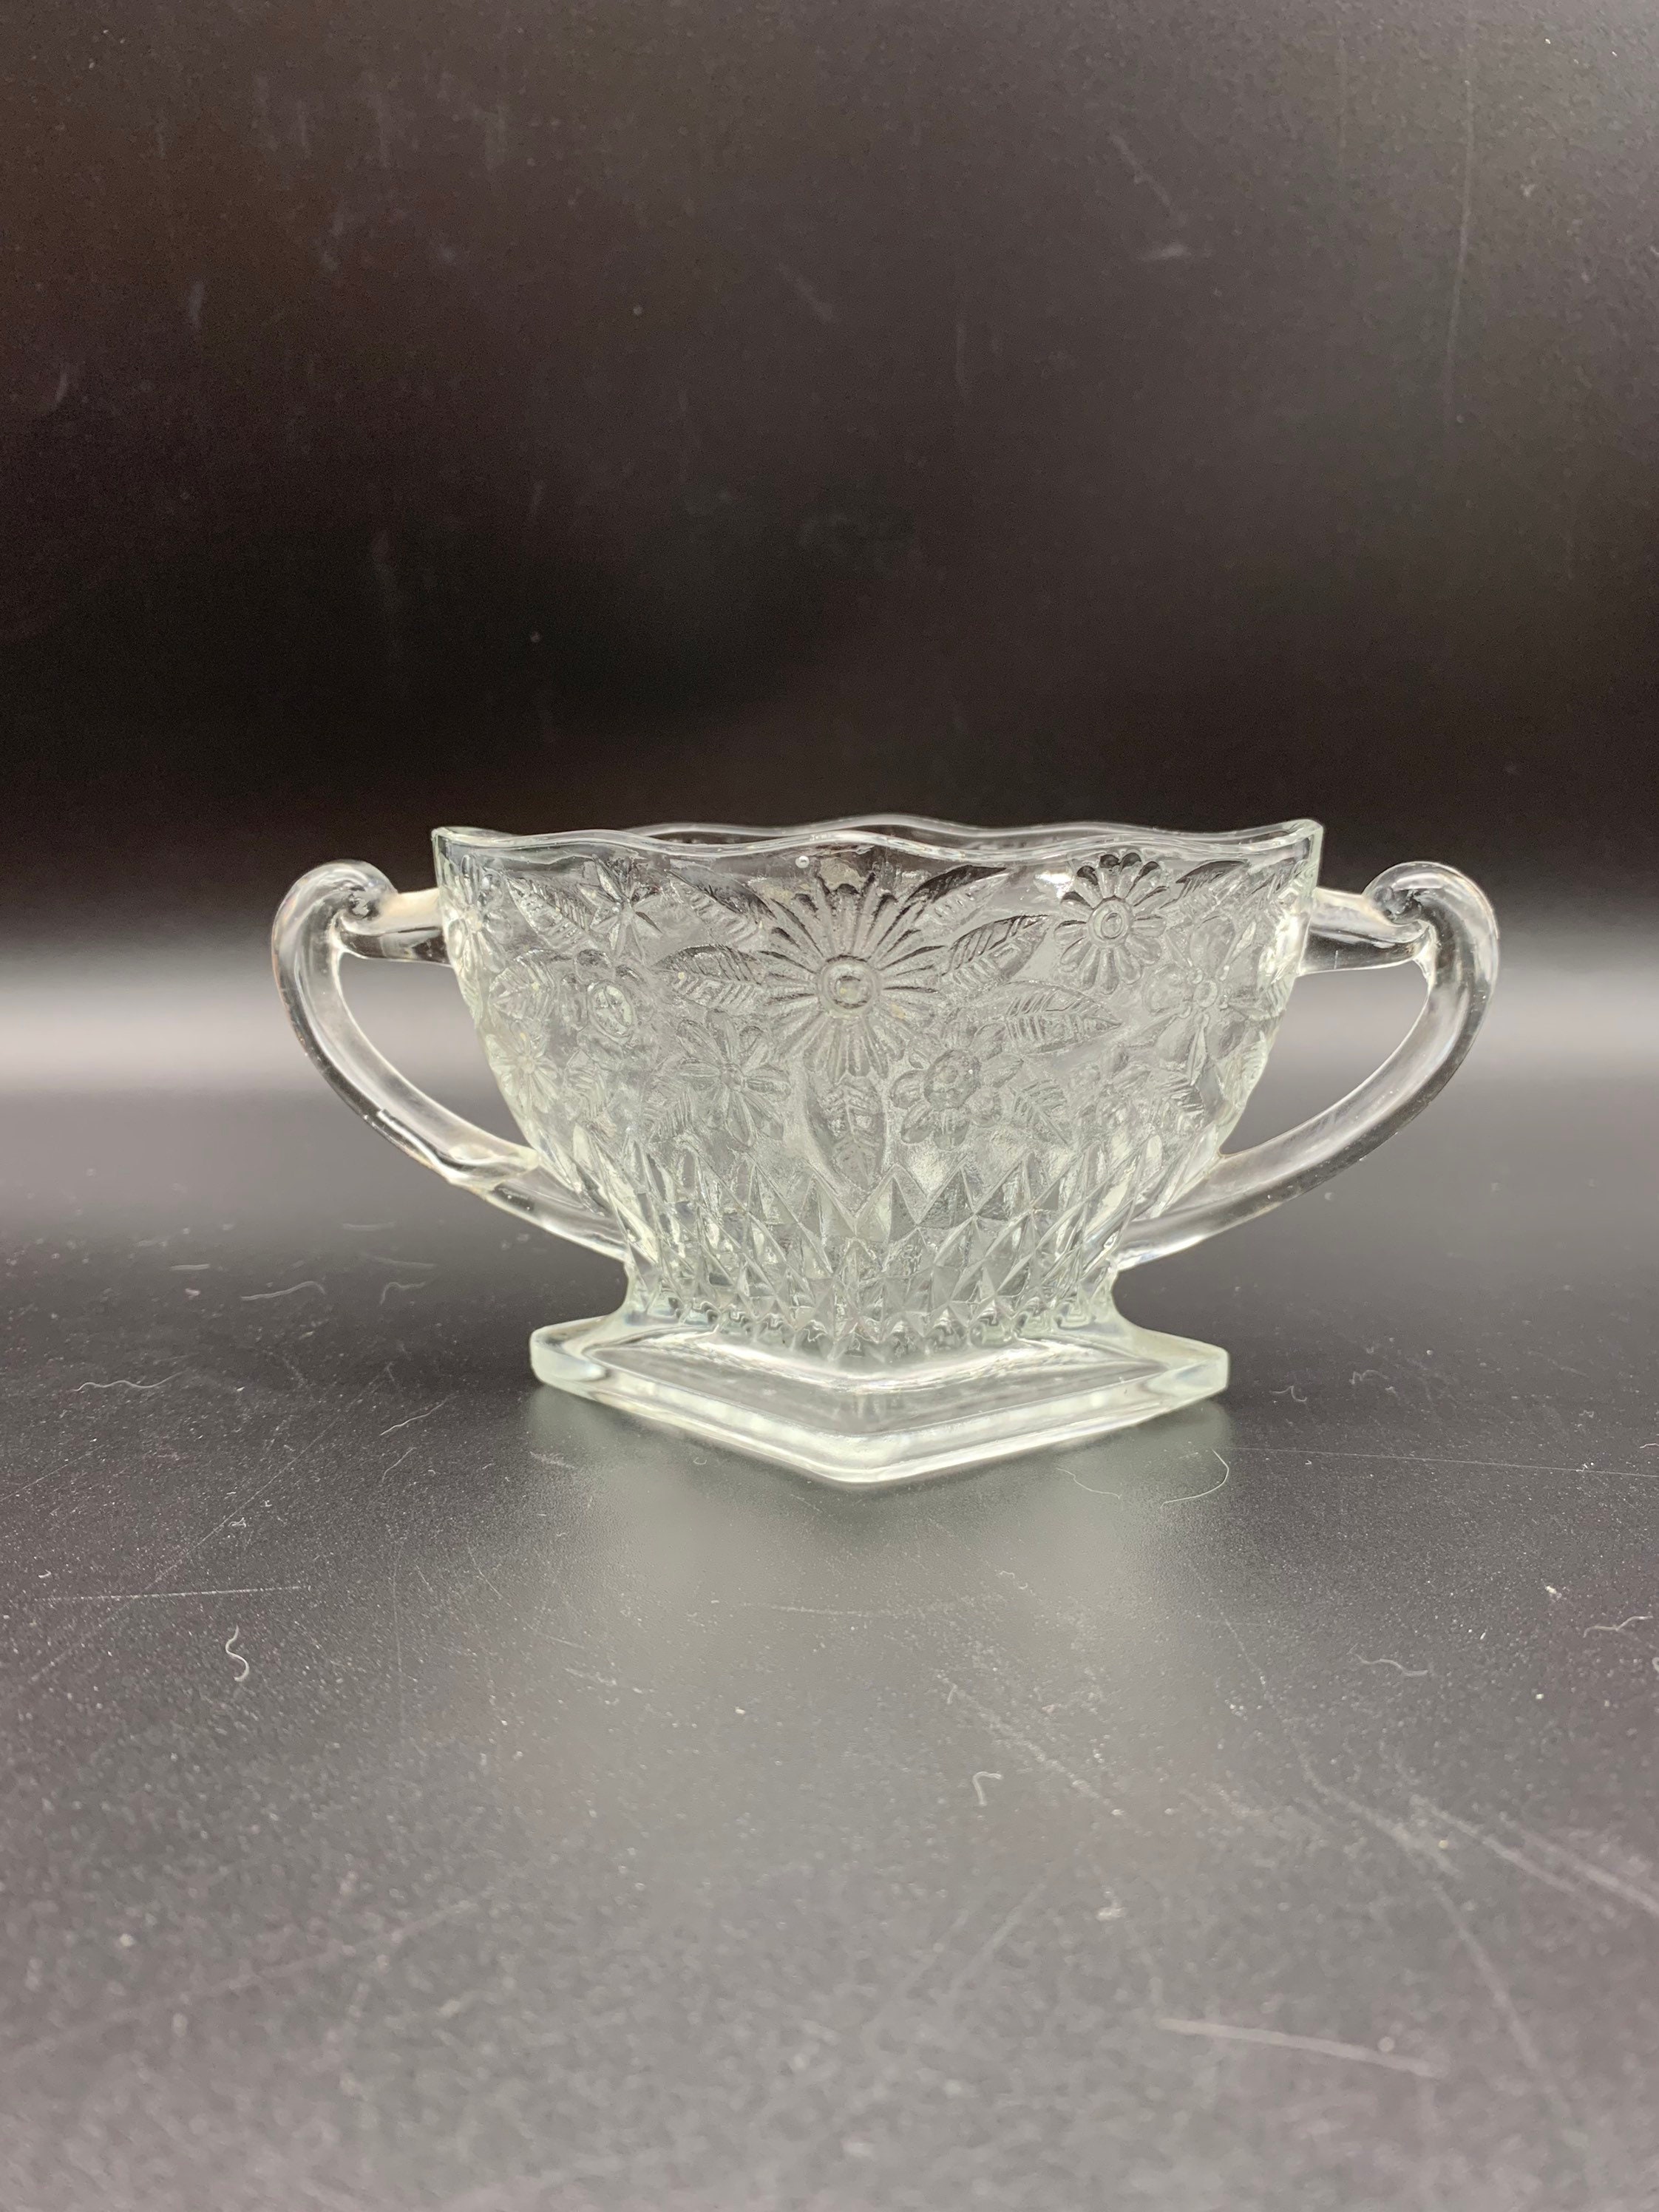 Home Decor Great Gift Kitchen Dining Serving Vintage Depression Glass 1930s Indiana Glass Pineapple Floral Serving Bowl Clear Crystal